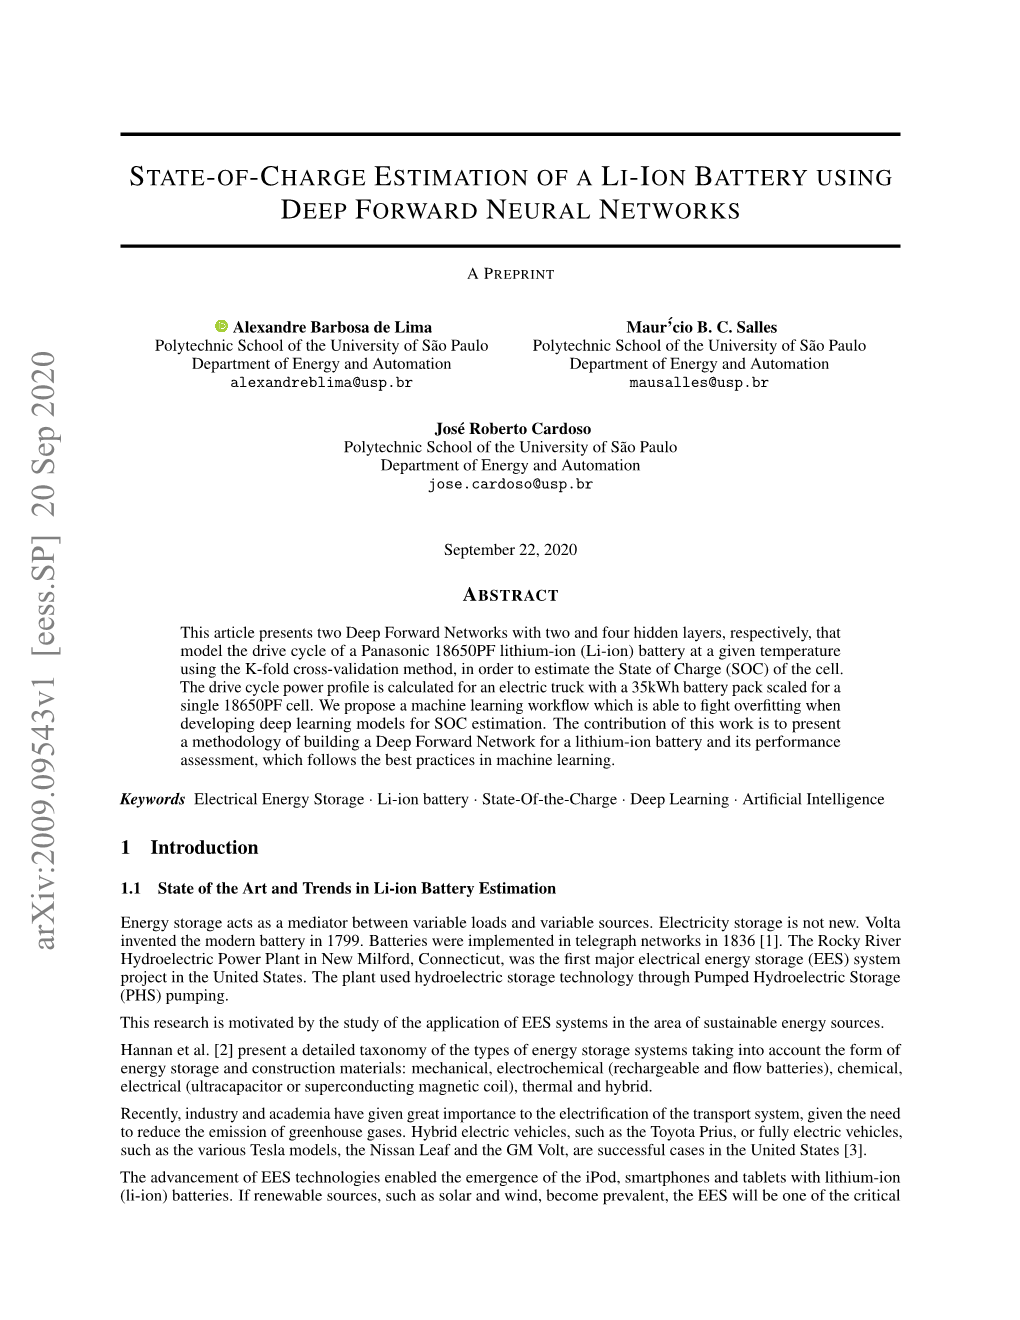 State-Of-Charge Estimation of a Li-Ion Battery Using Deep Forward Neural Networks